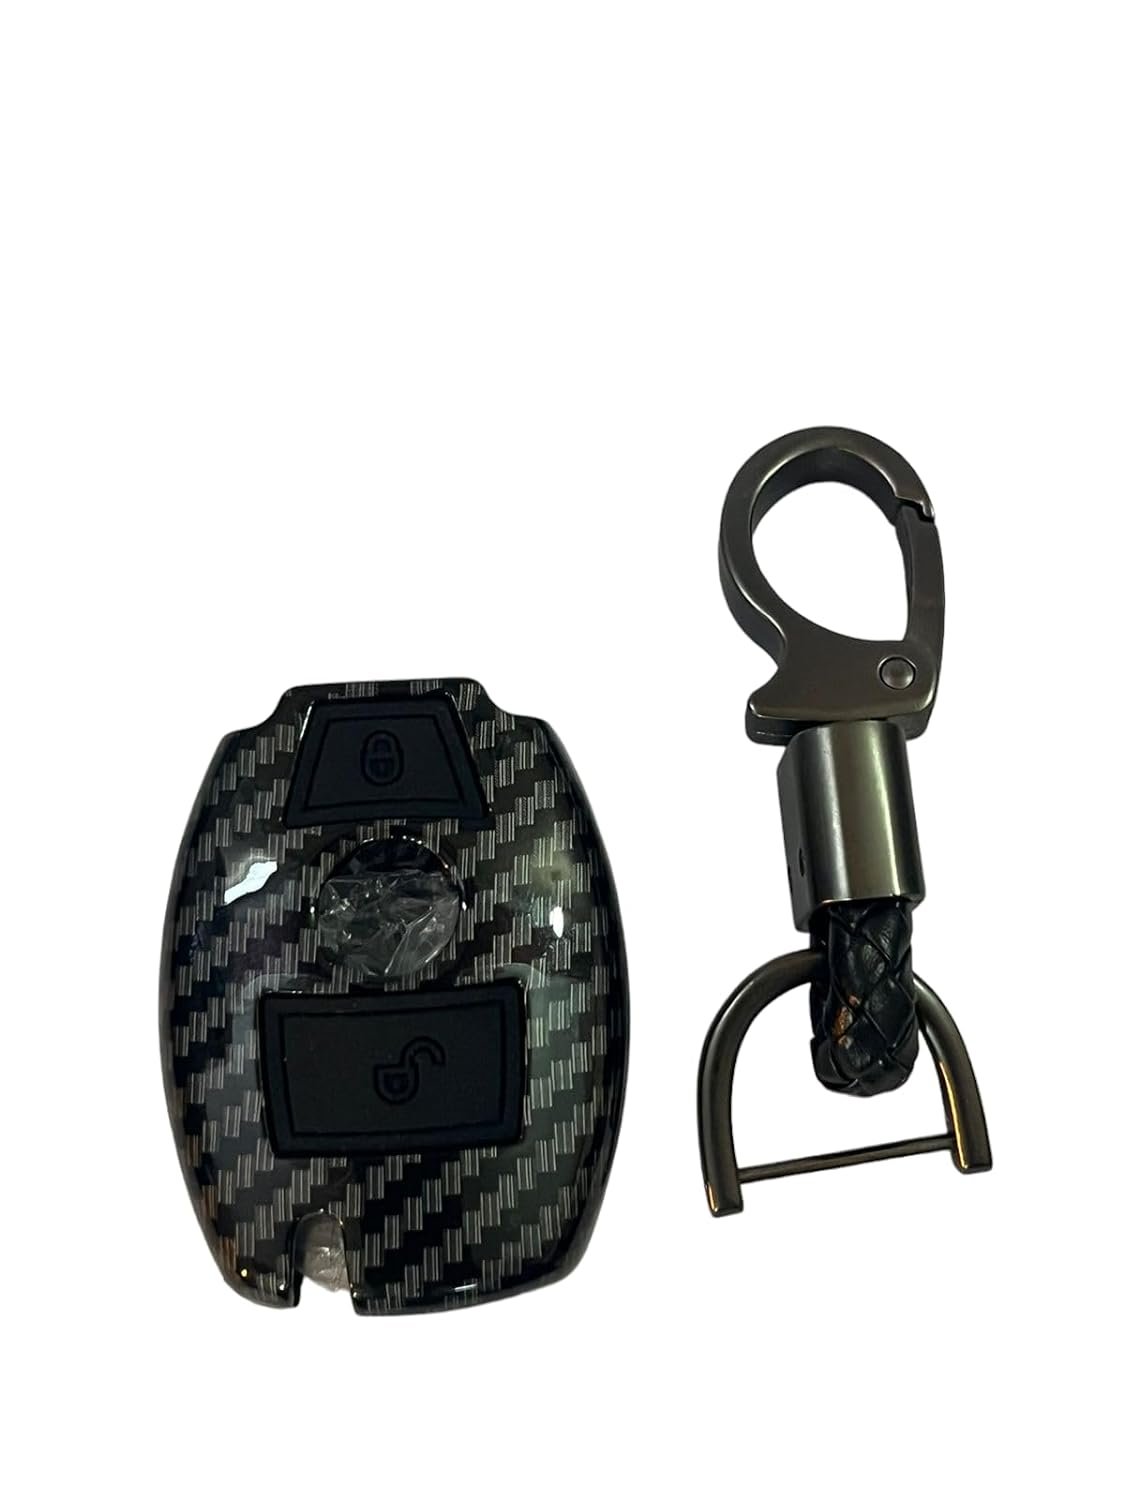 Carbon Fiber ABS Car Key Cover Compatible with Mercedes Benz Smart Key (Key Chain Included) Image 